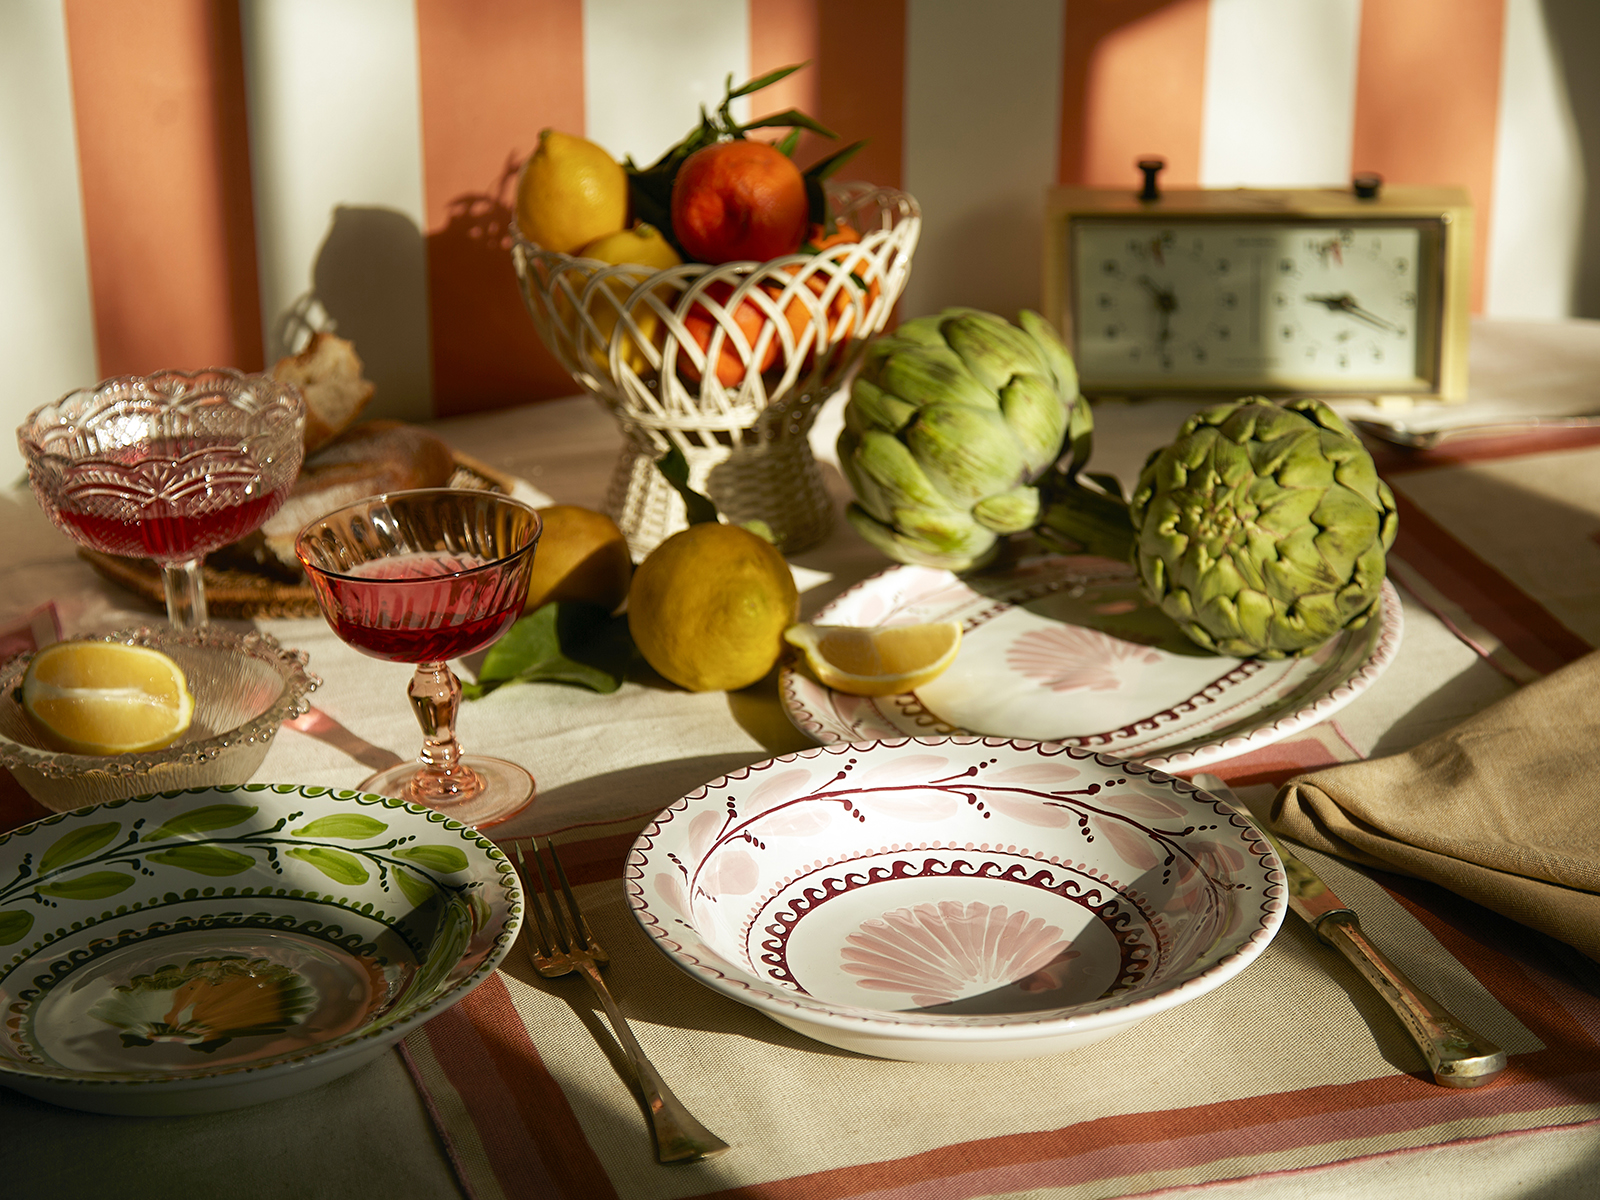 A tablescape using items created by designer Gergei Erdei